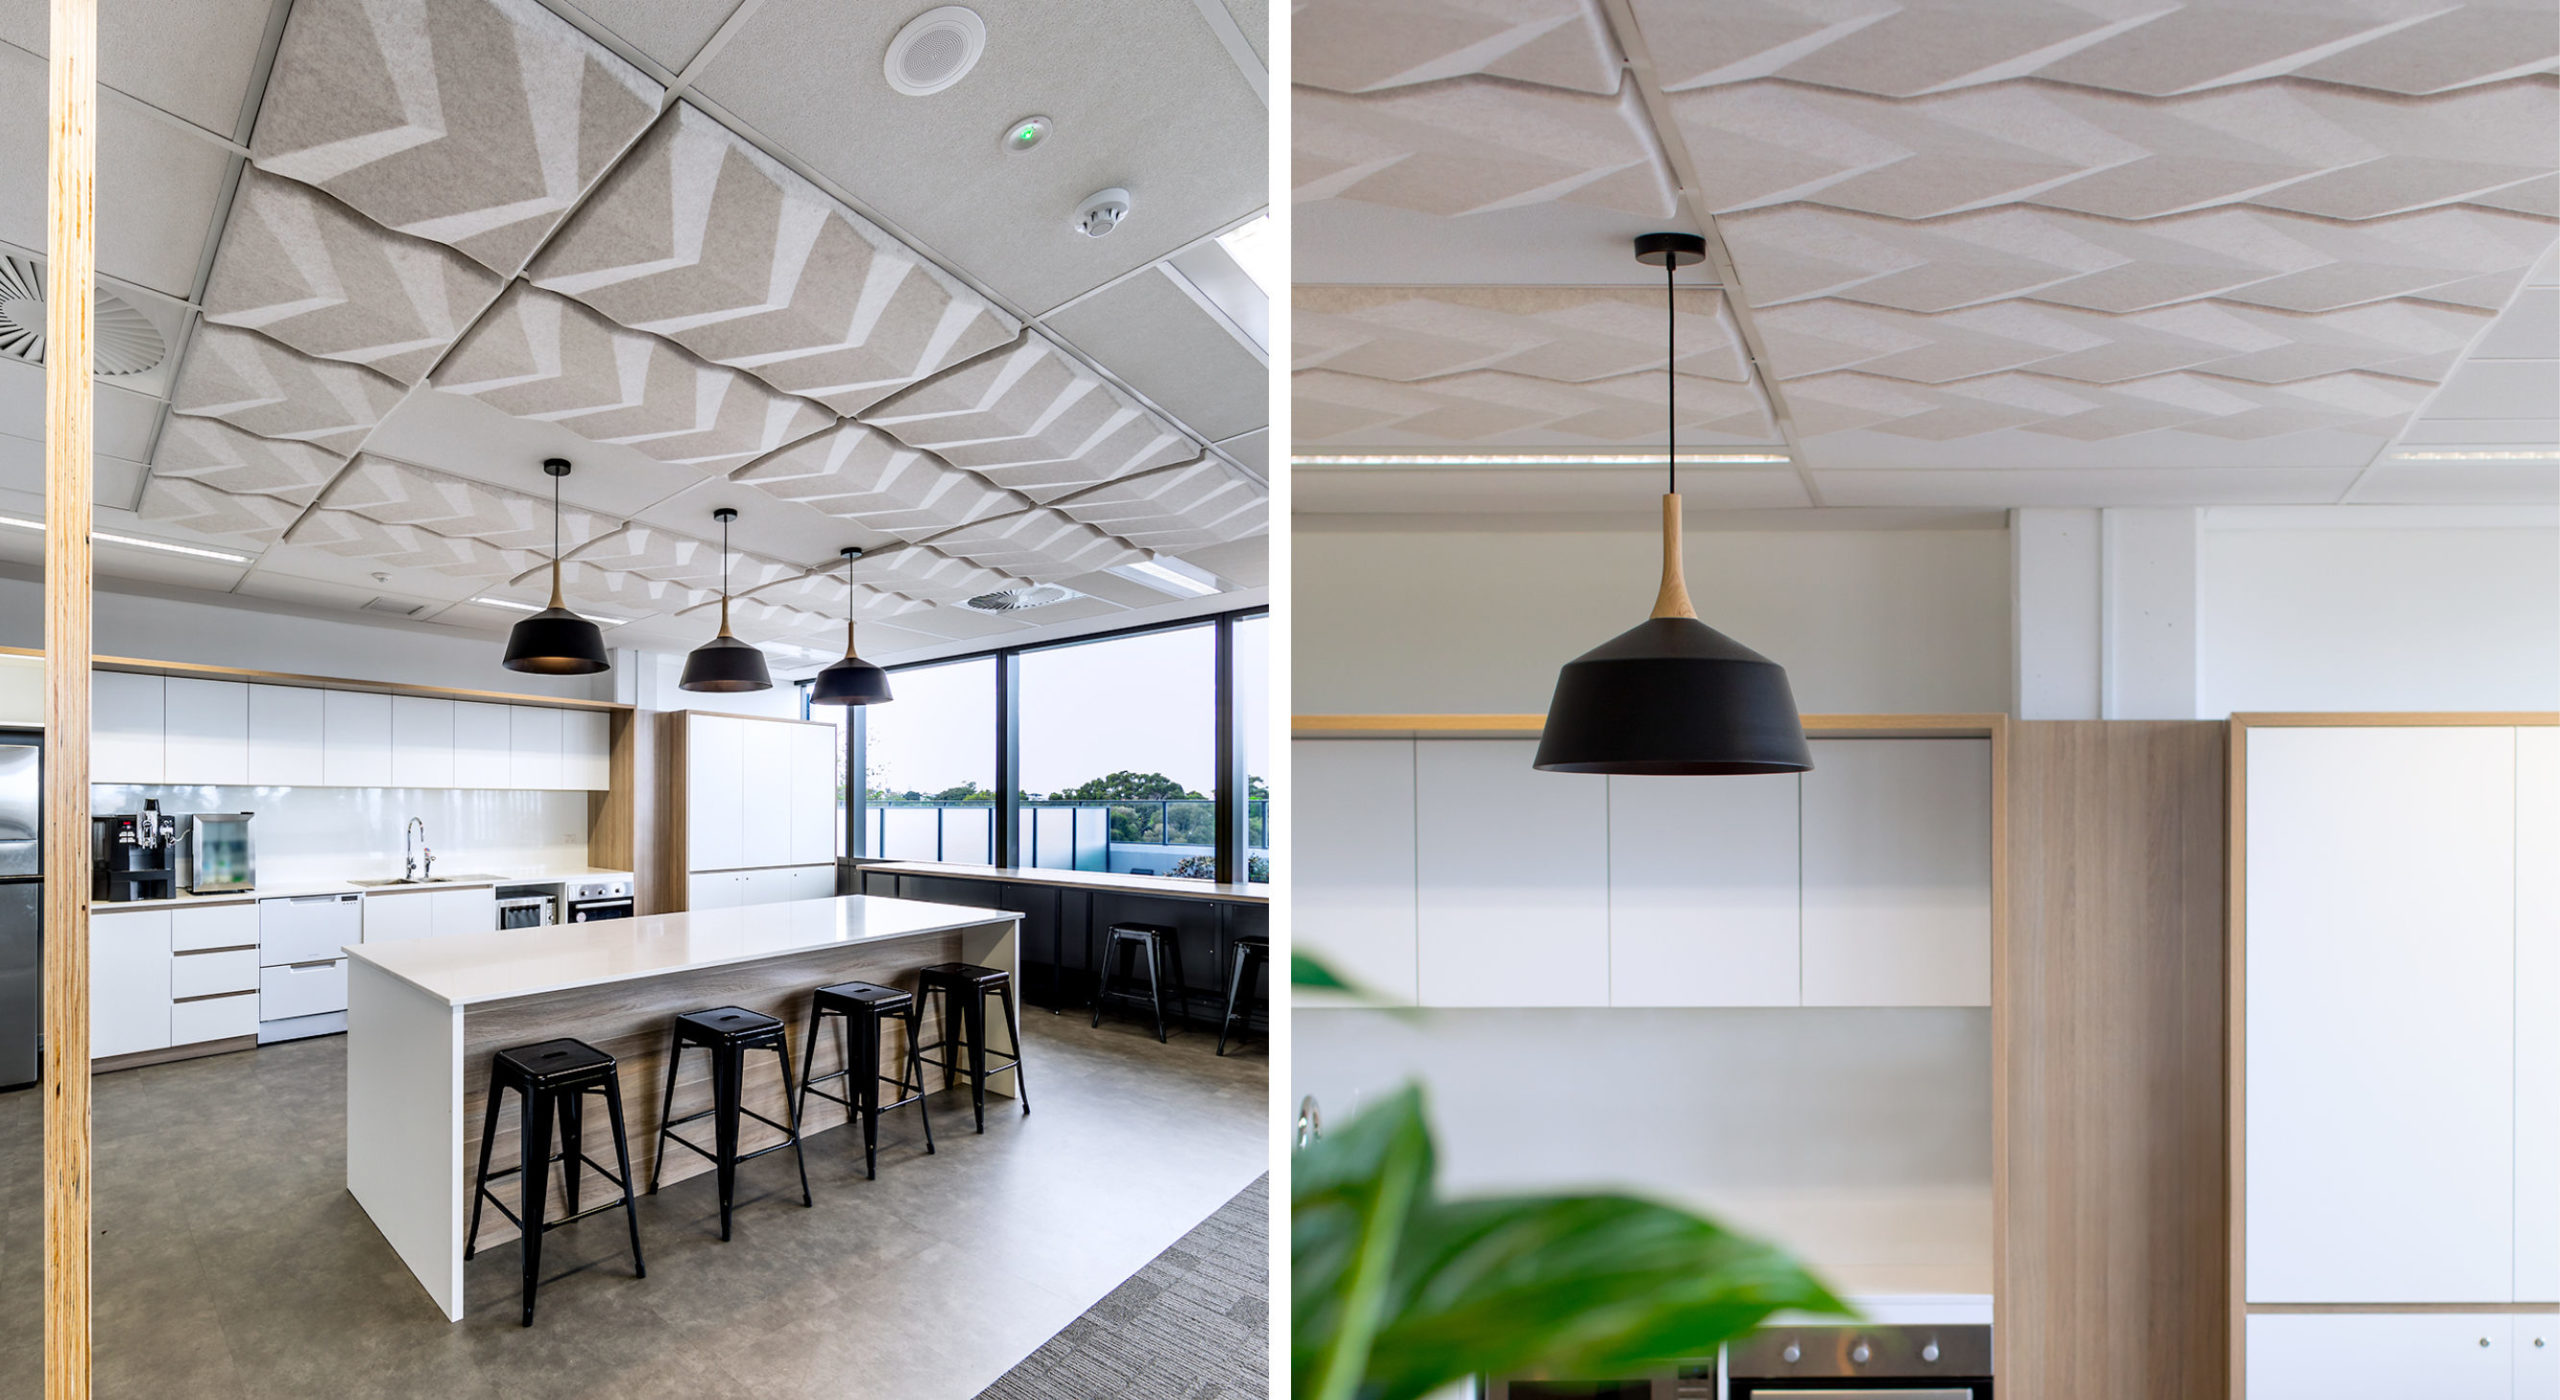 beige sound-absorbing ceiling tiles above kitchen area with a close-up of drop lights